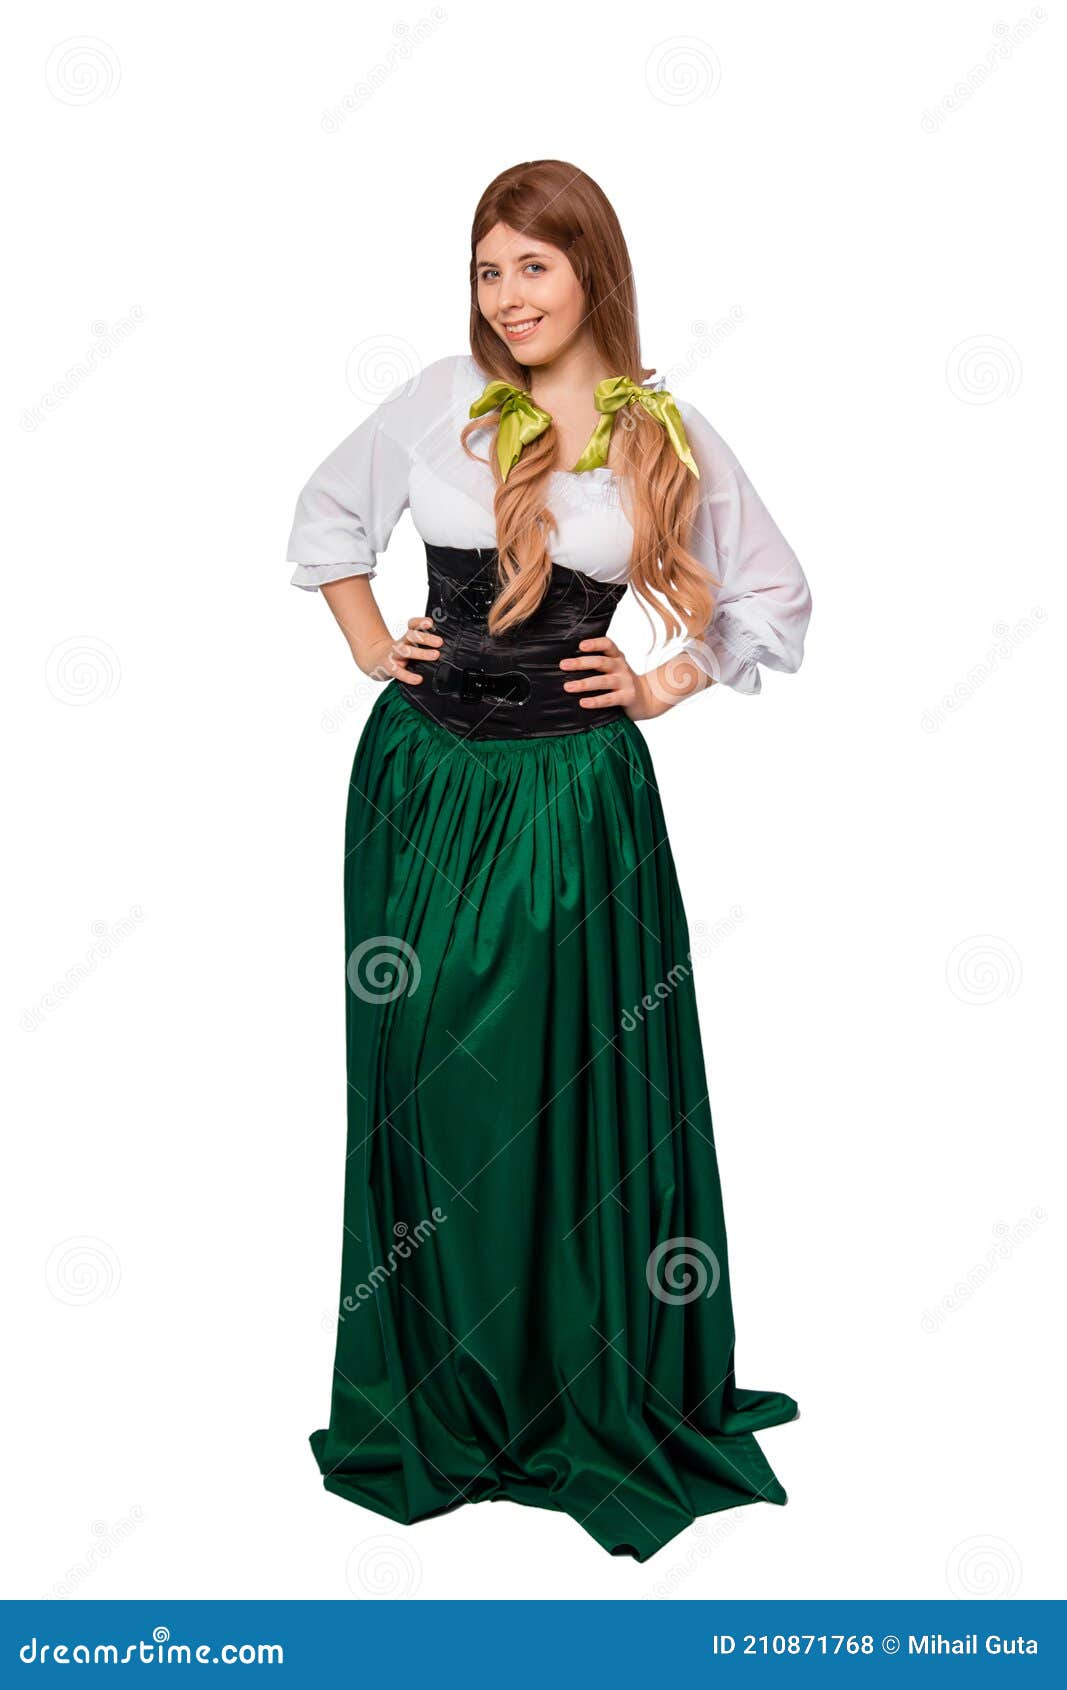 Woman in Green Skirt, Black Corset and White Shirt Posing Isolated on White  Background. Stock Photo - Image of cheerful, bavaria: 210871768